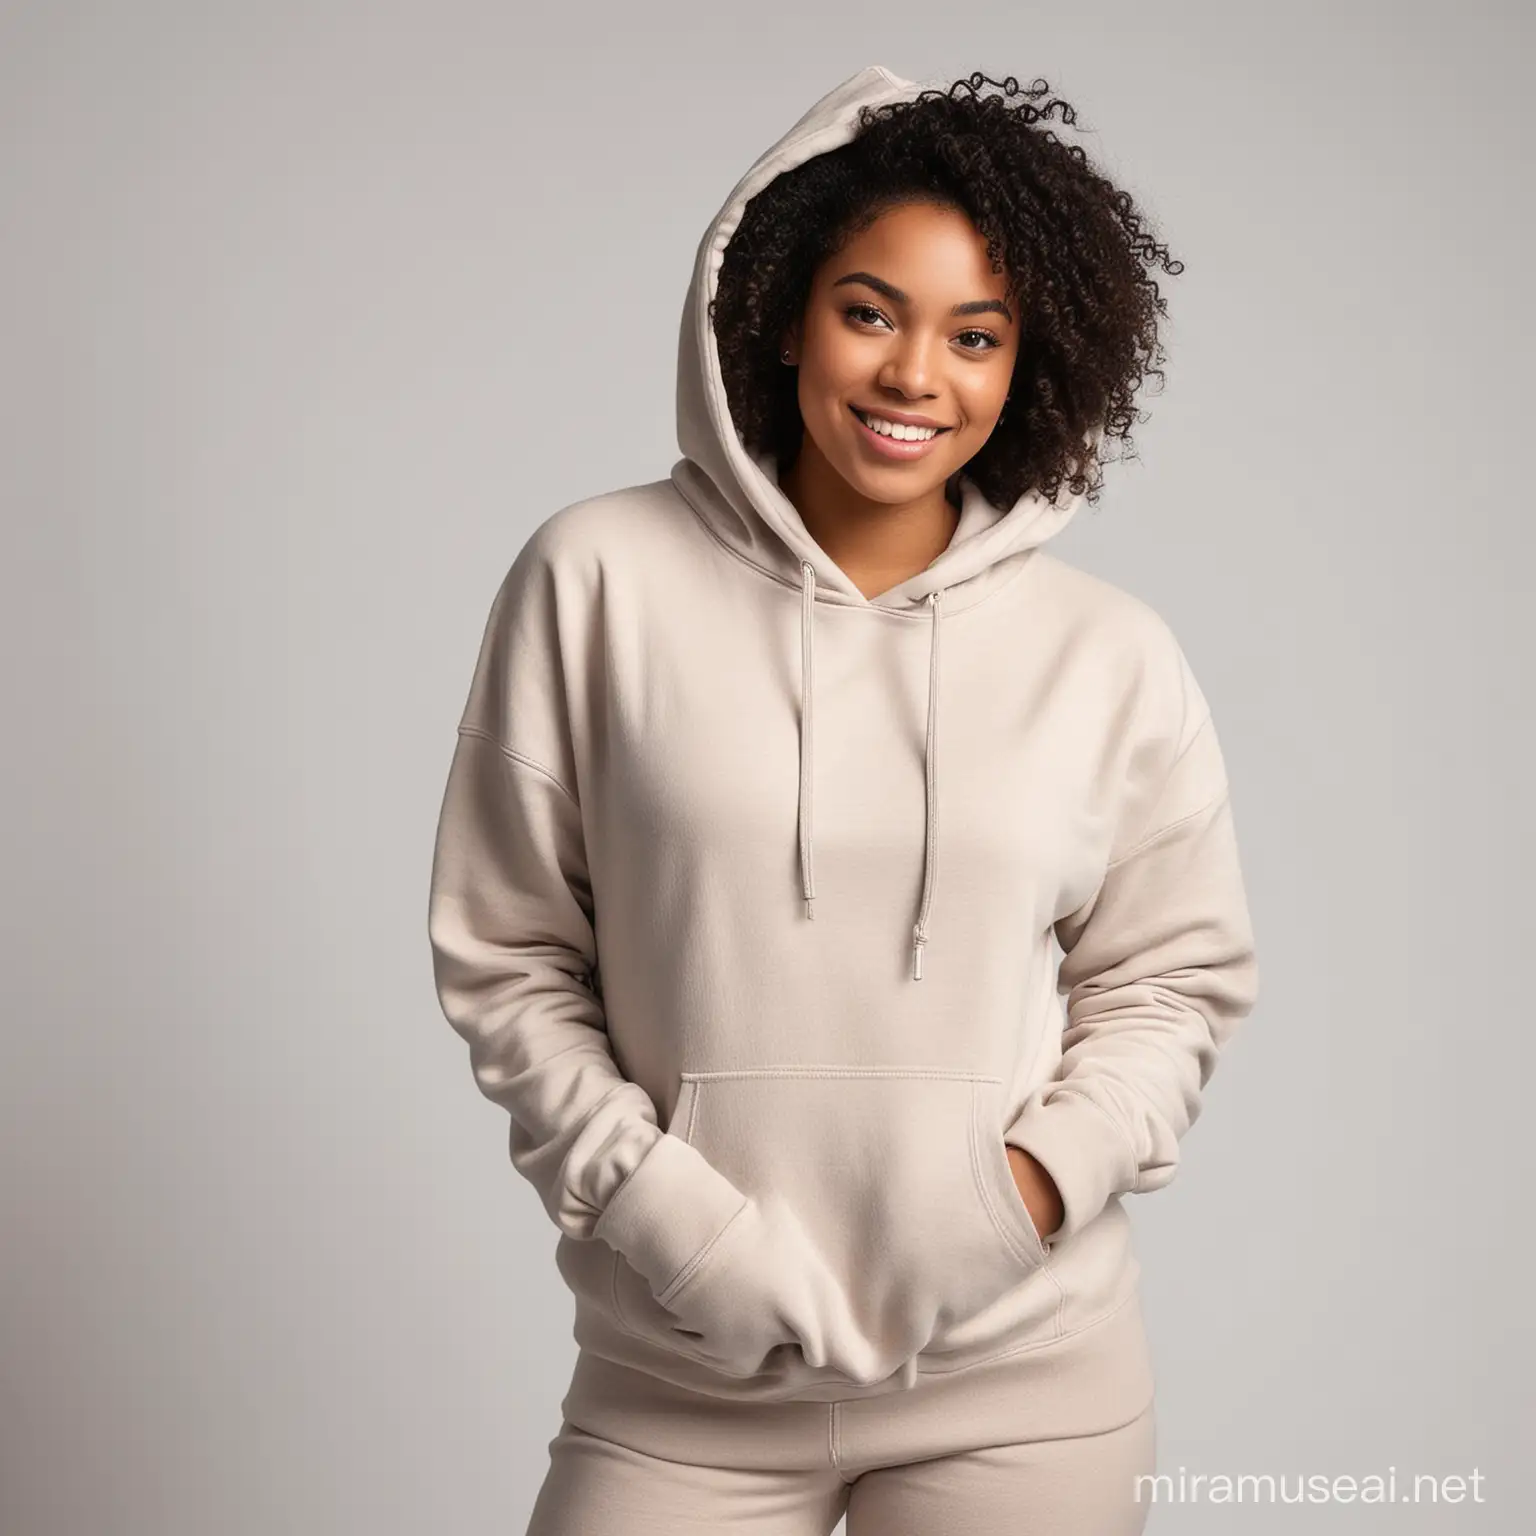 full body woman of color wearing a Hooded Sweatshirt, posing and happy, photographic background white